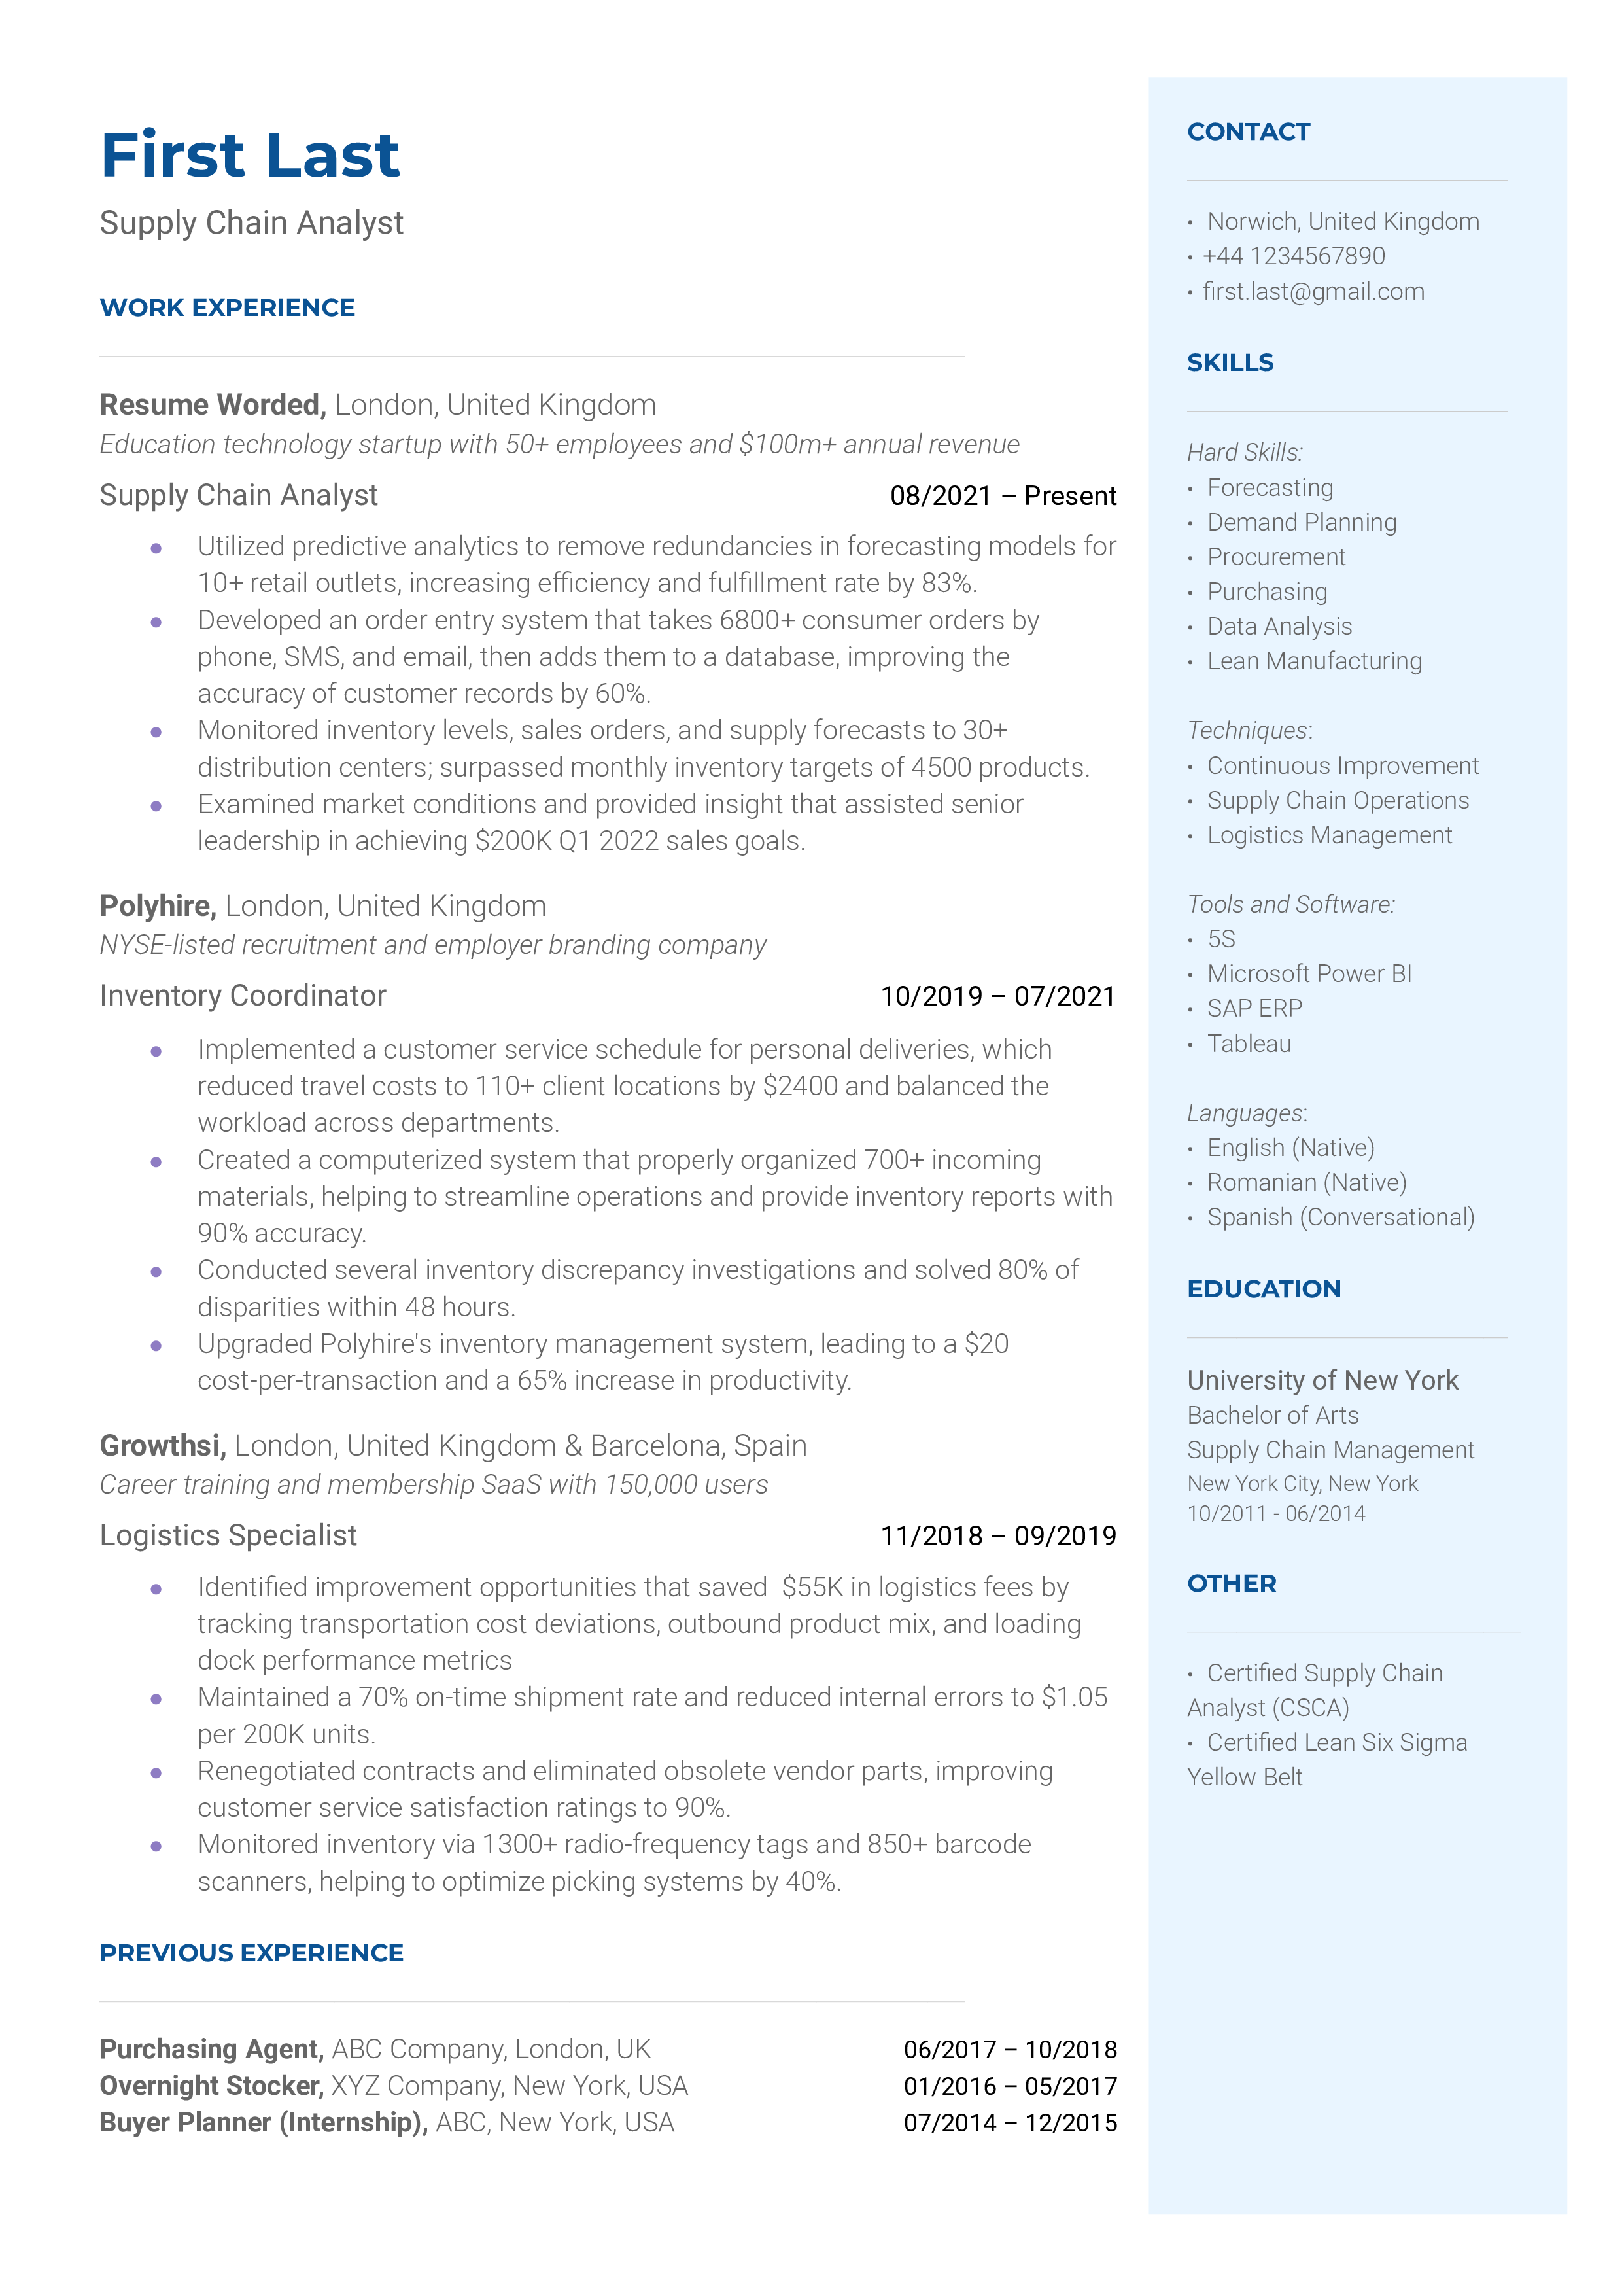 A supply chain analyst resume template focused on logistics techniques.